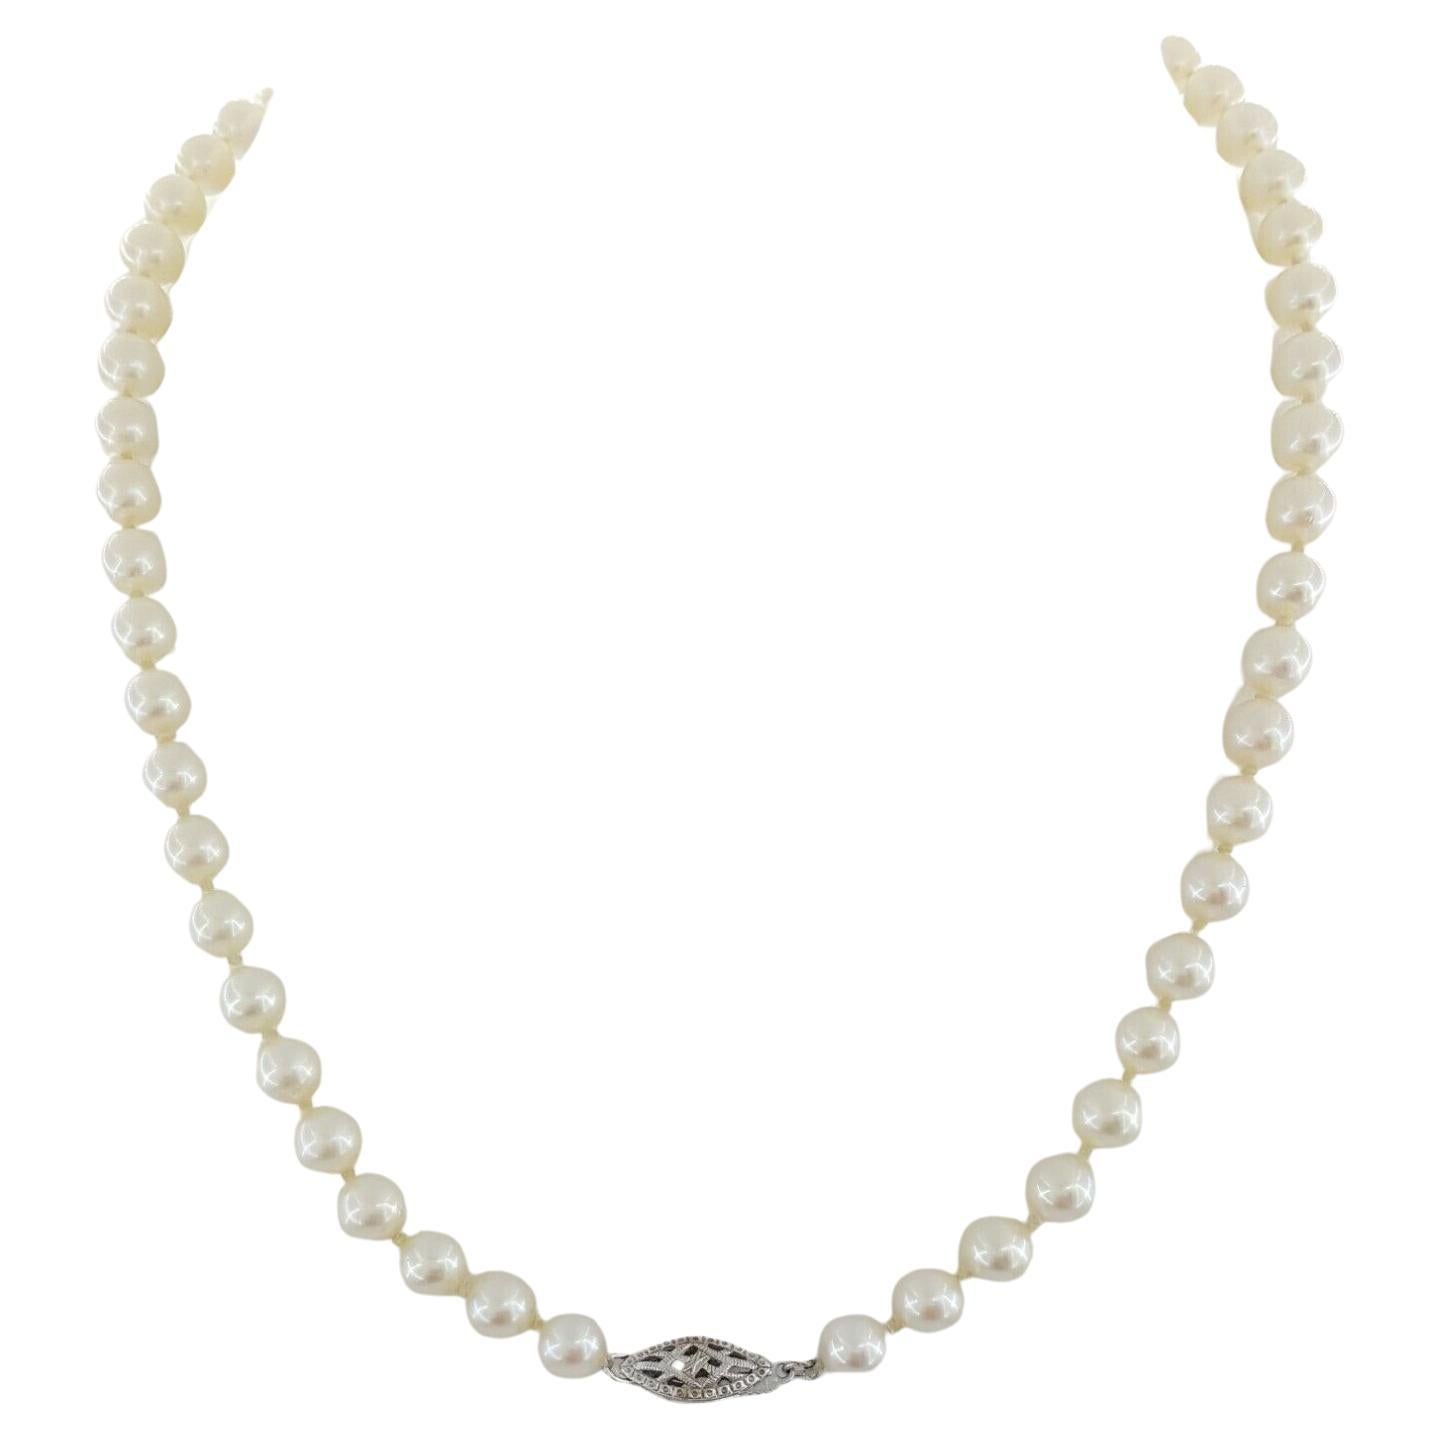 6-6.5 mm Akoya Pearl Strand Necklace 